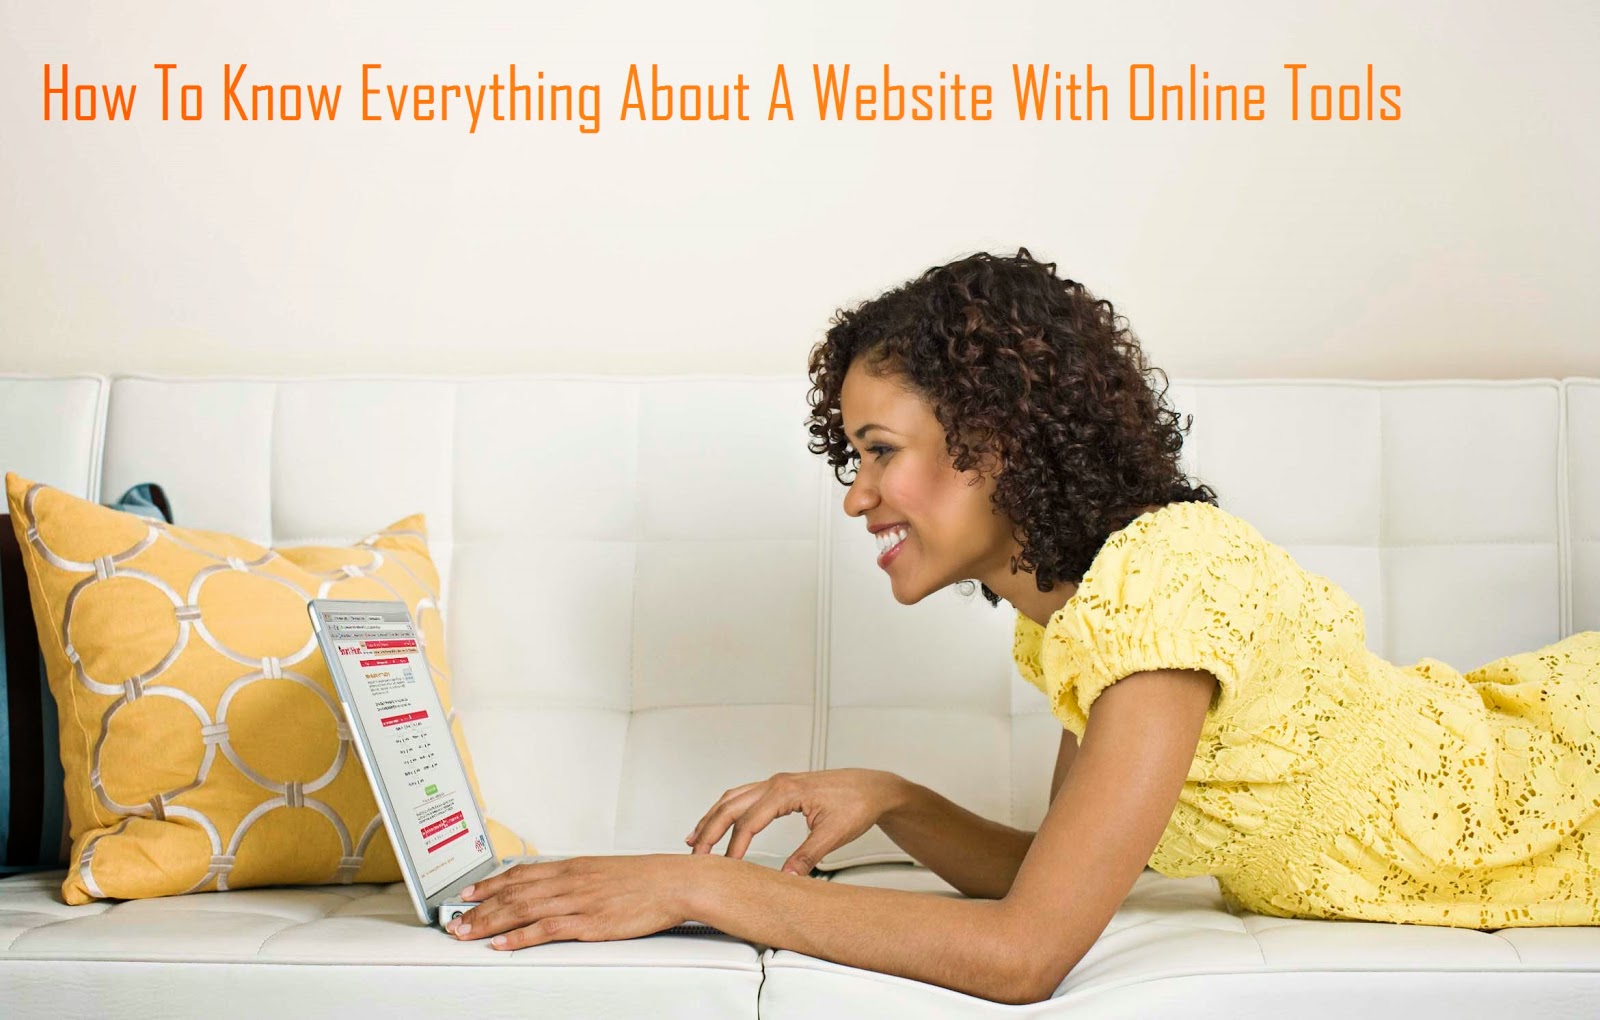 How To Know Everything About A Website With Online Tools